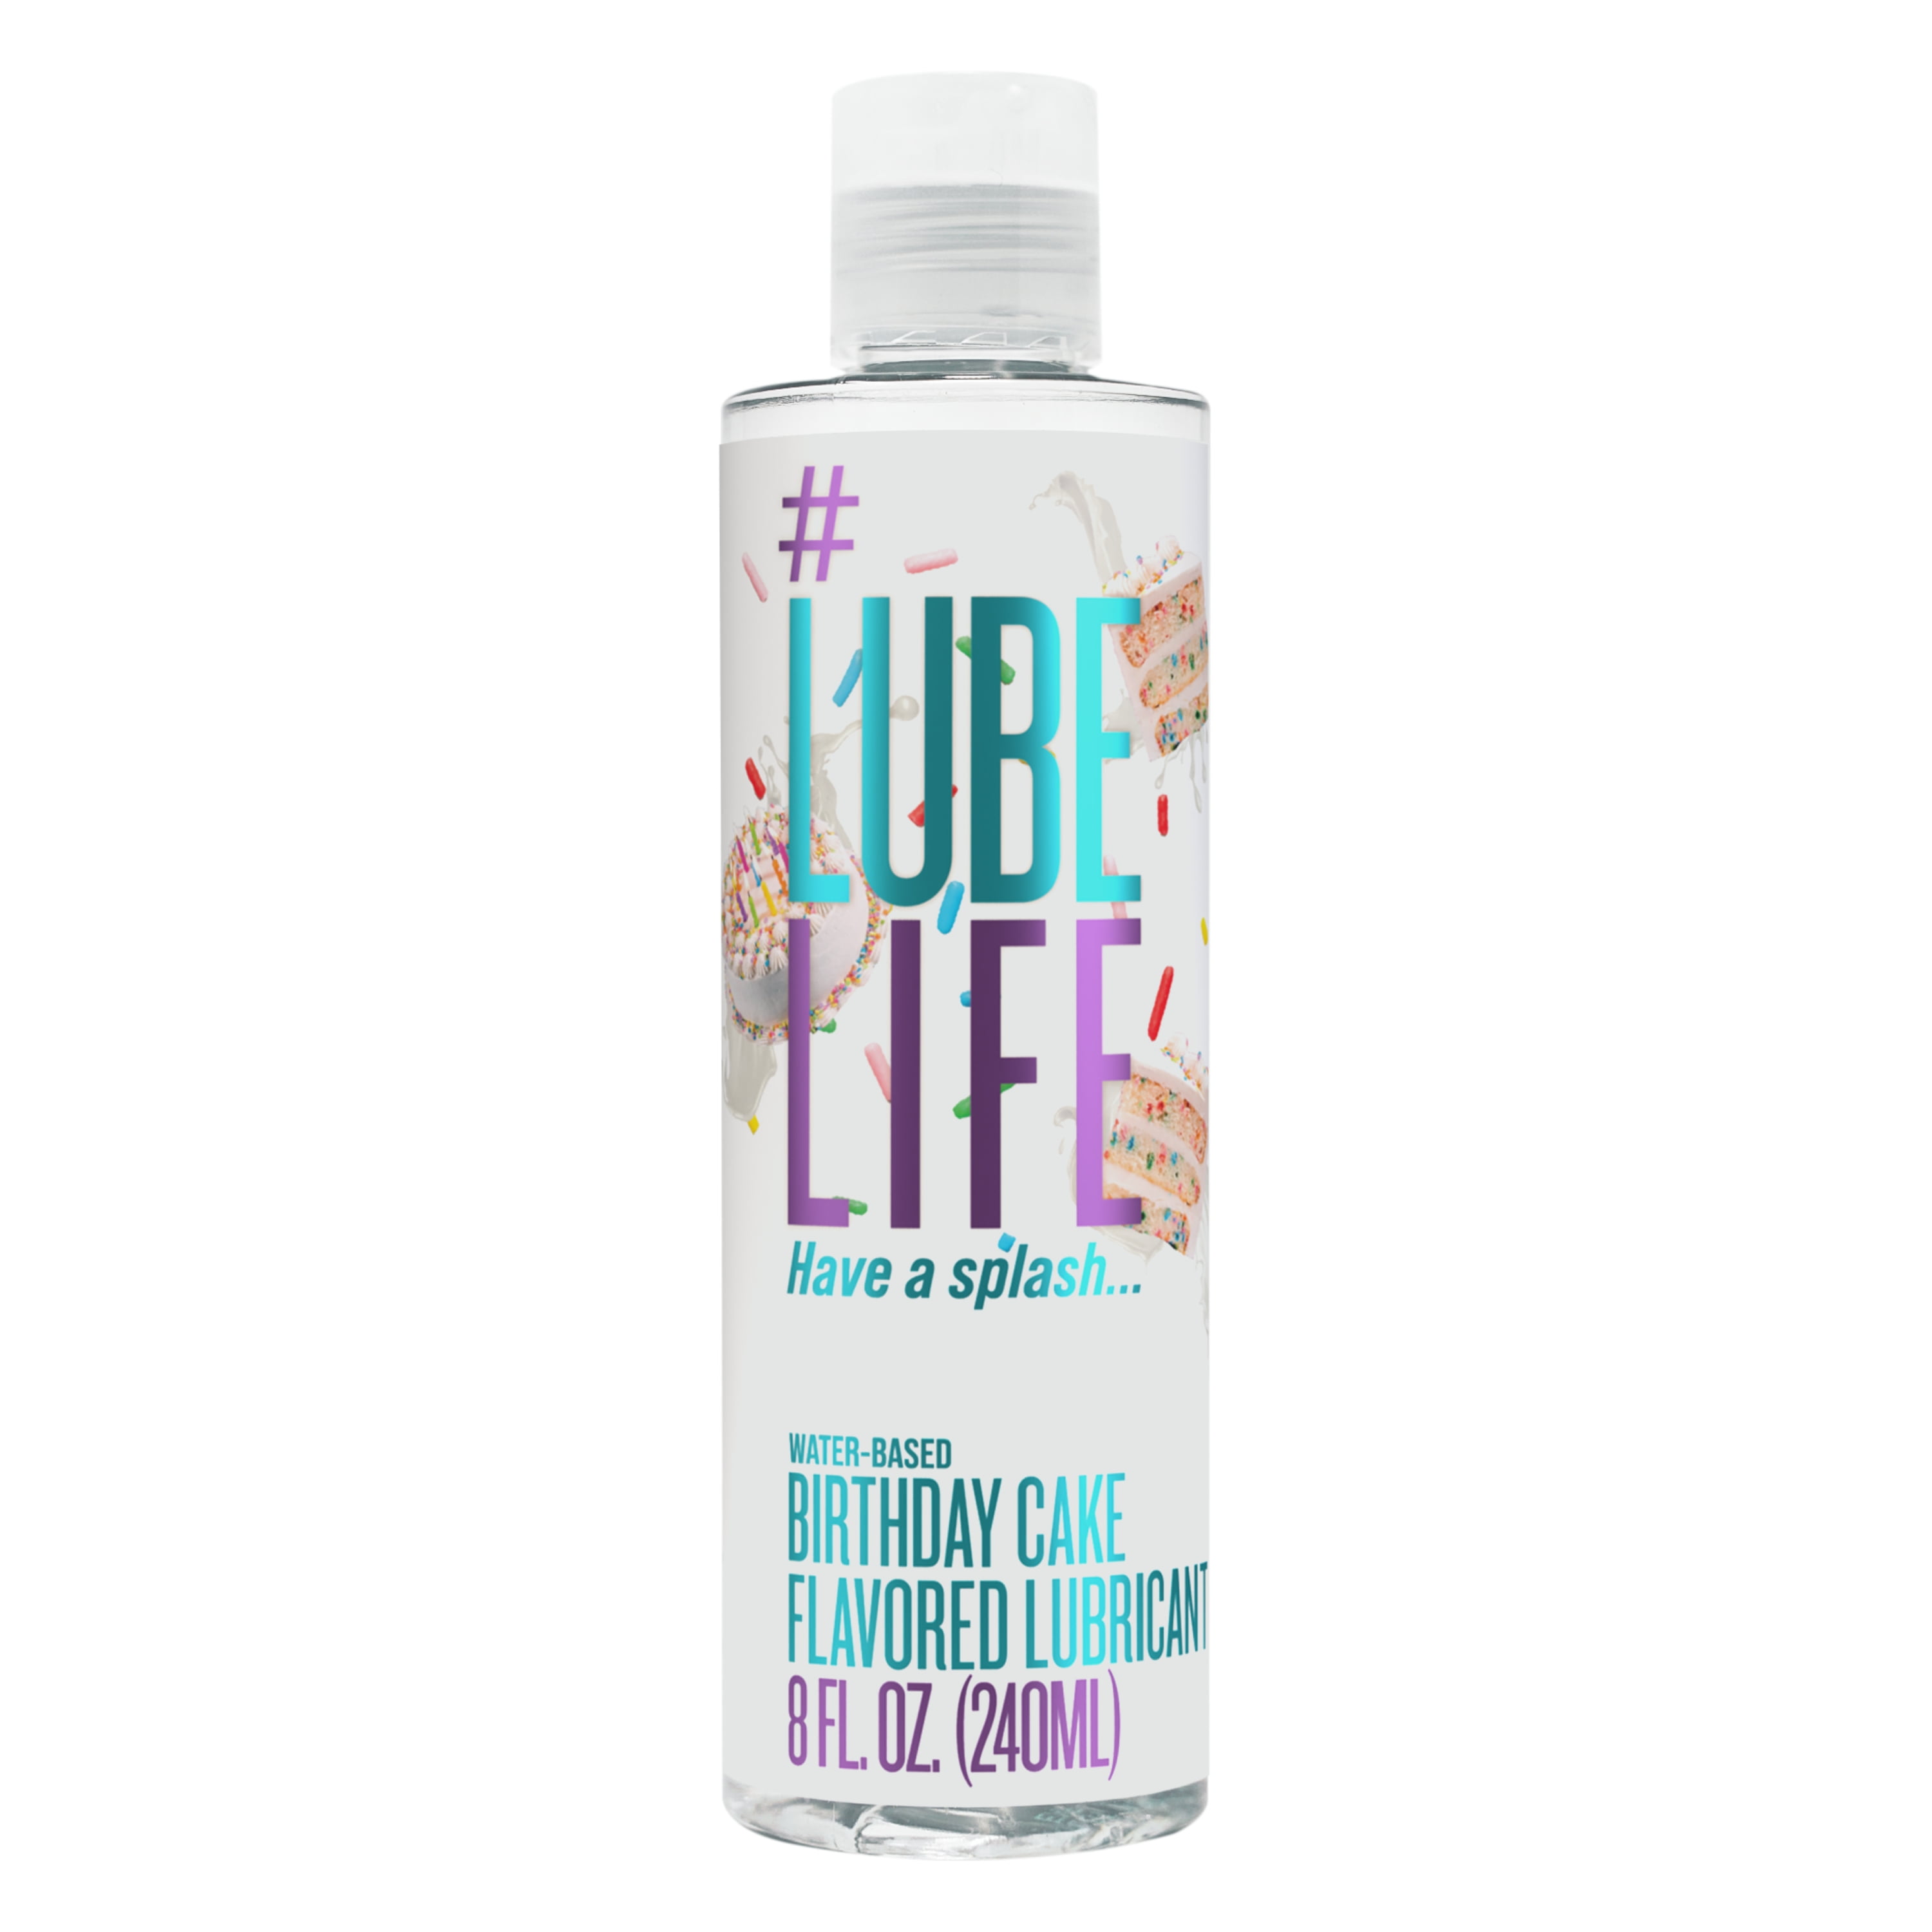 Lube Life Water-Based Cotton Candy Flavored Lubricant, Personal Lube for Men, Women and Couples, Made Without Added Sugar, 8 fl oz